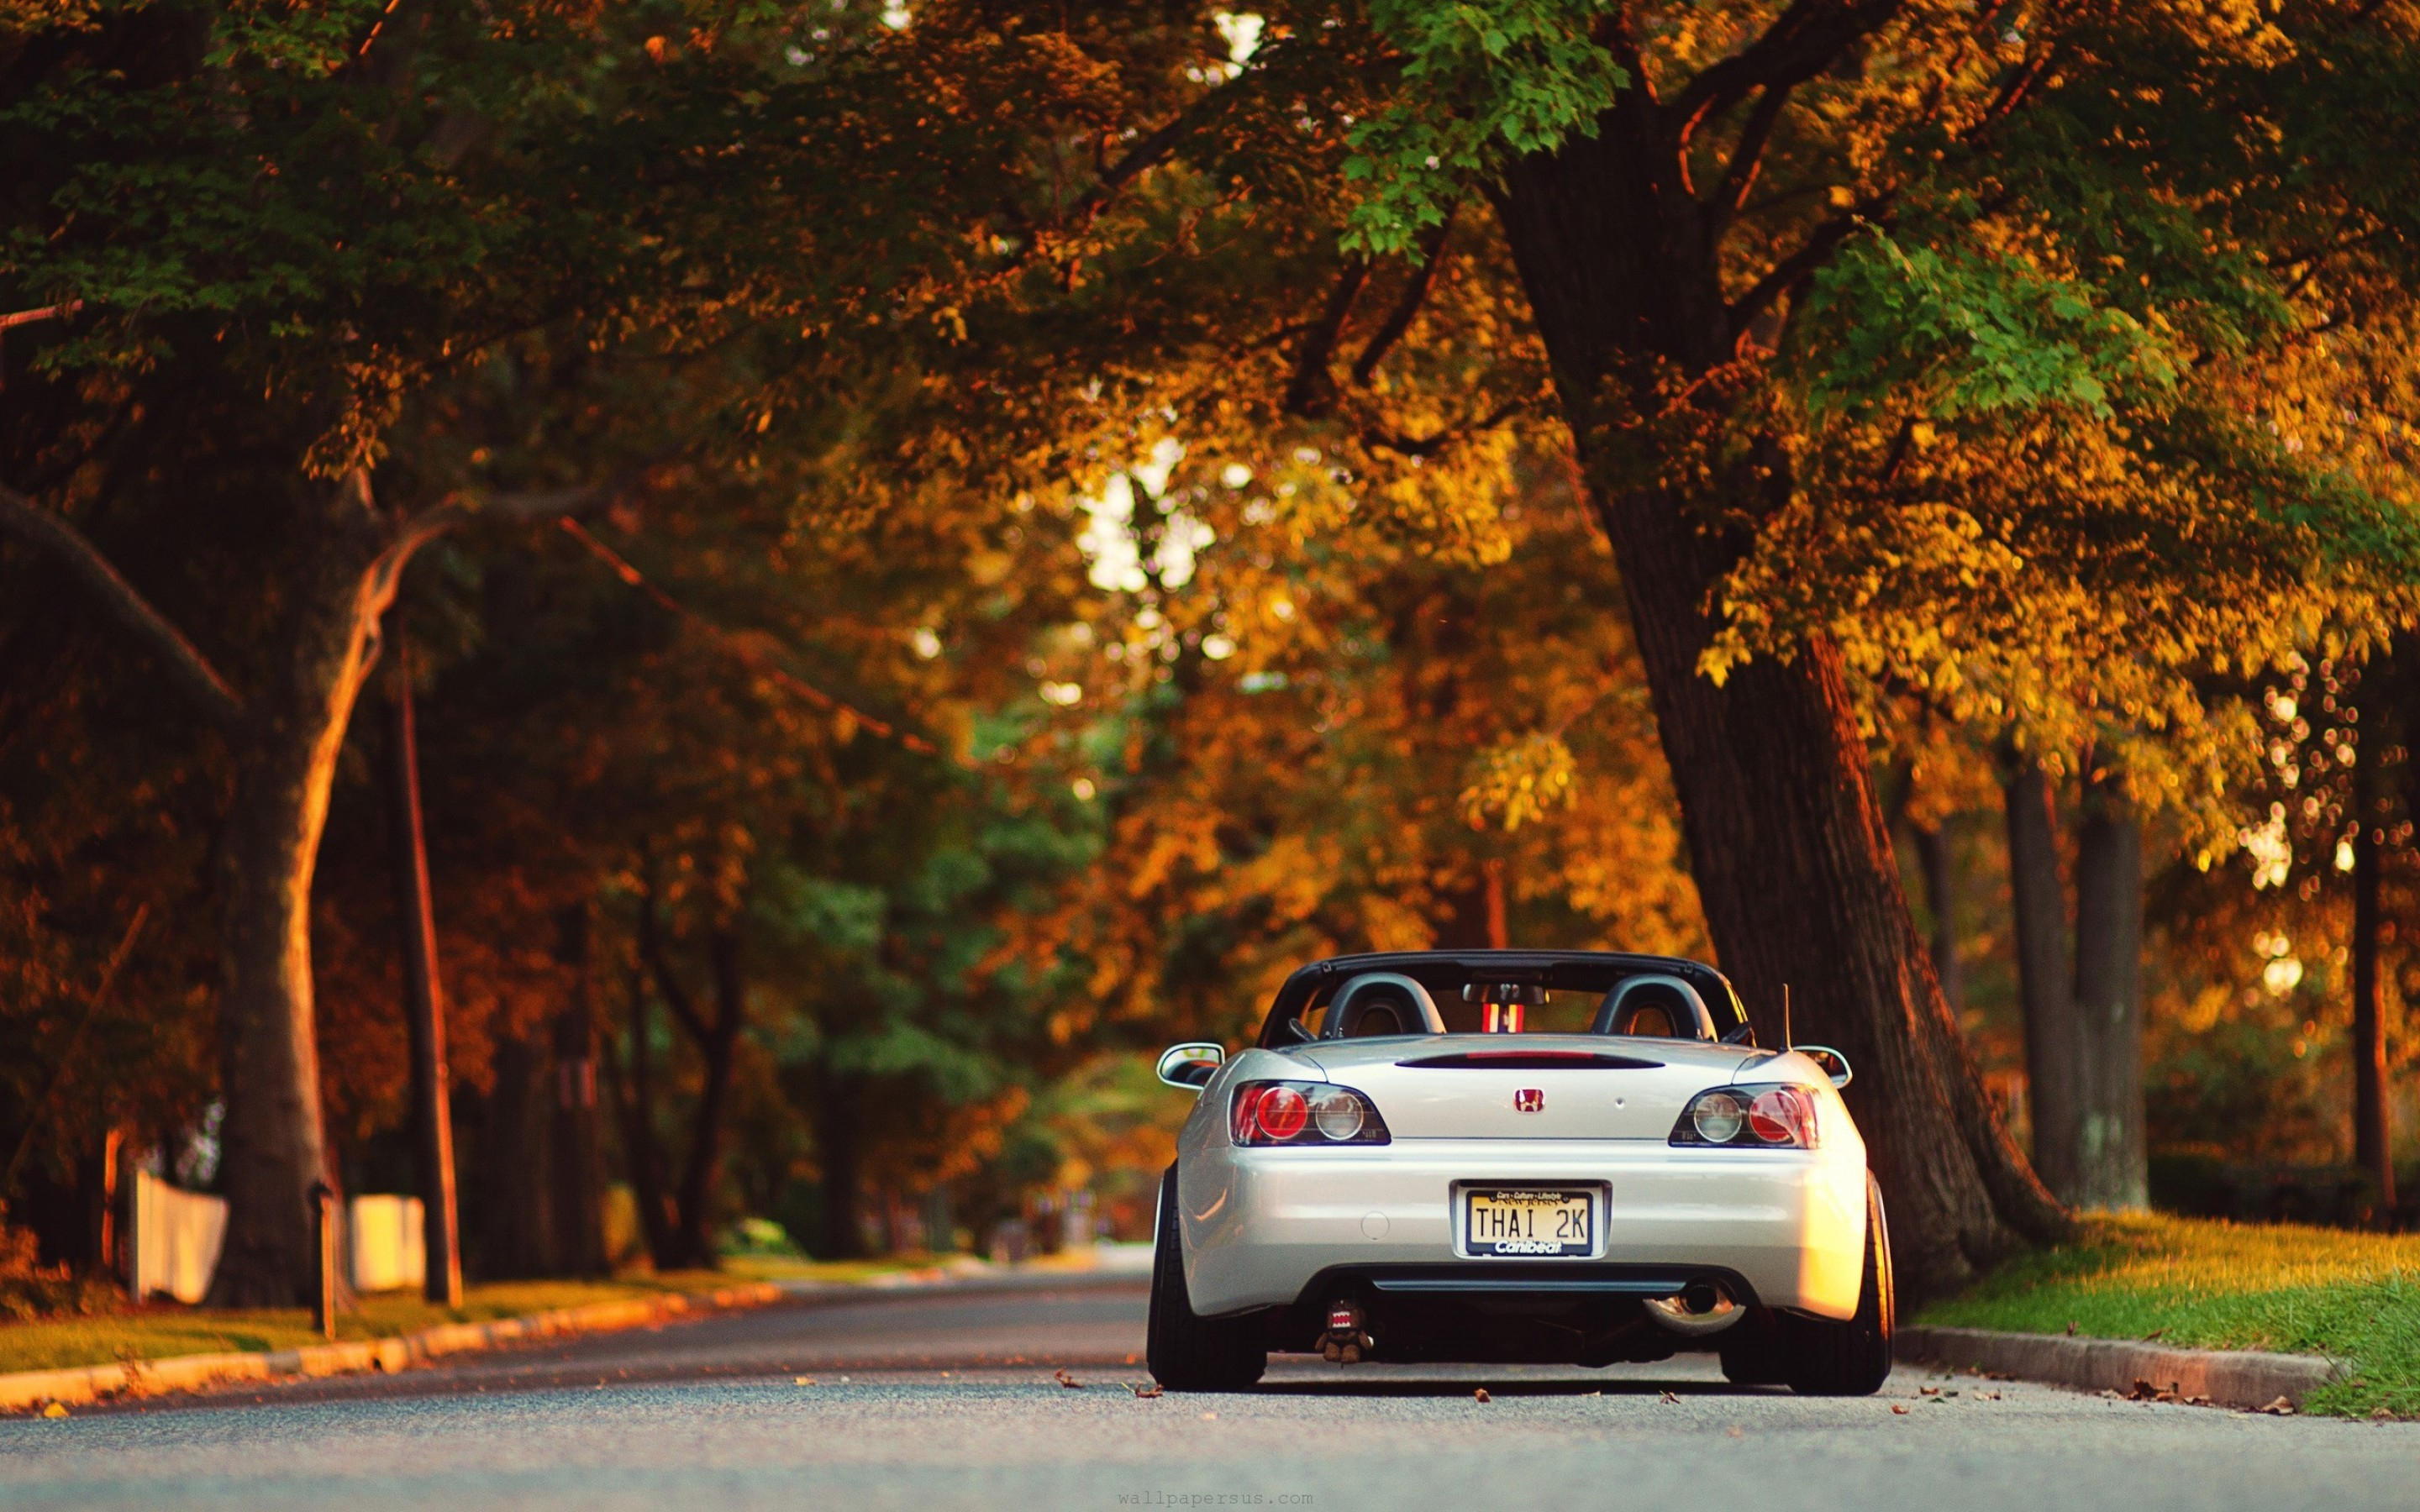 2880x1800 30+ Honda S2000 HD Wallpapers and Backgrounds